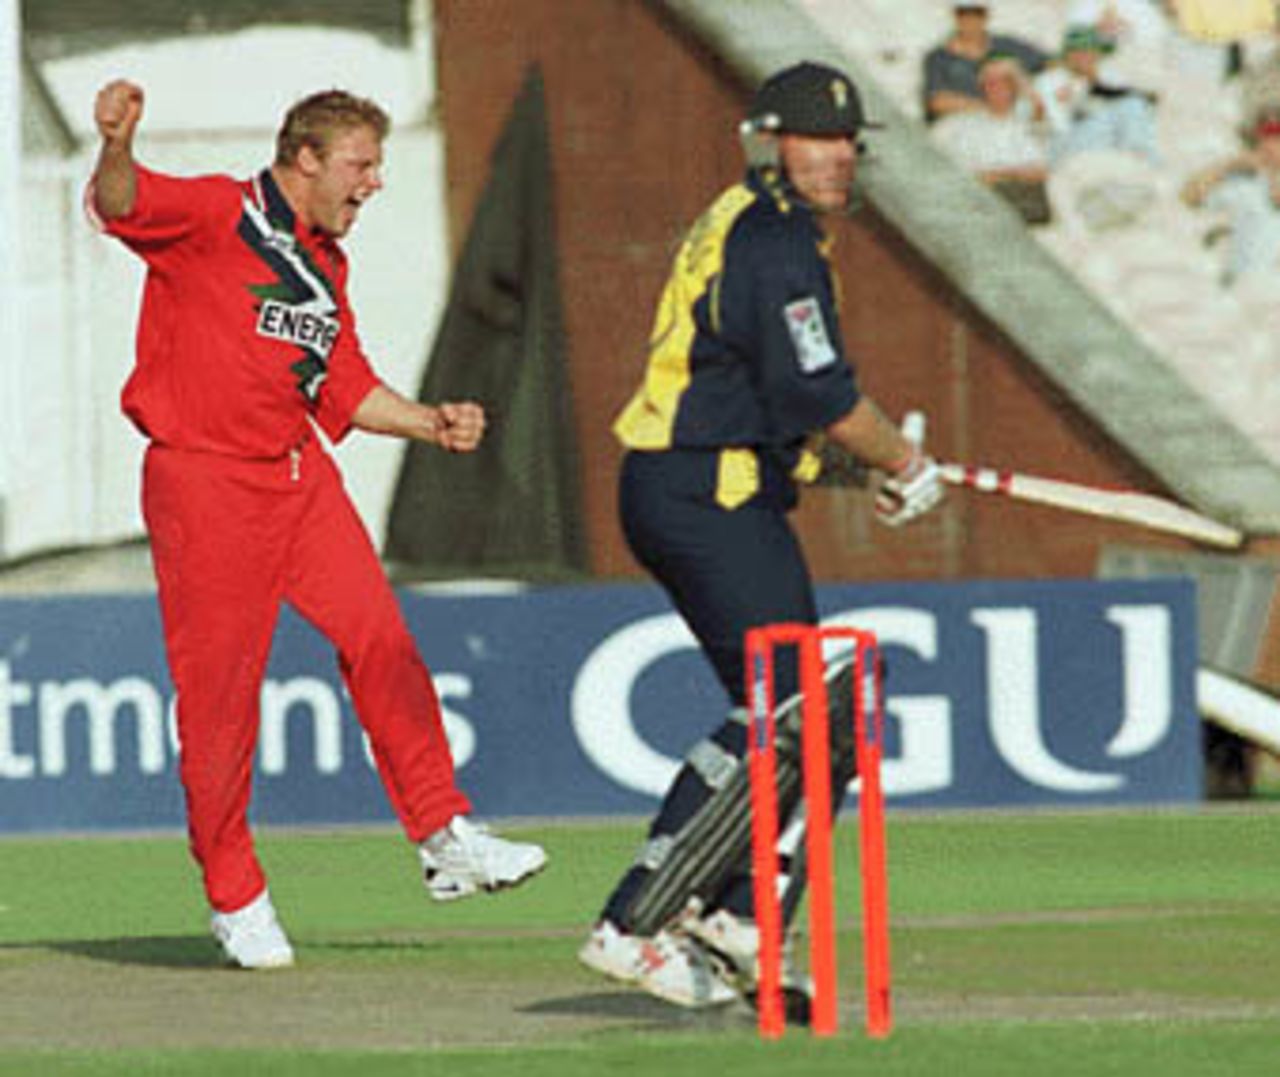 Andrew Flintoff celebrating the wicket of Kendall, Hampshire v Lancashire, National League 1st Division, 6 September 1999